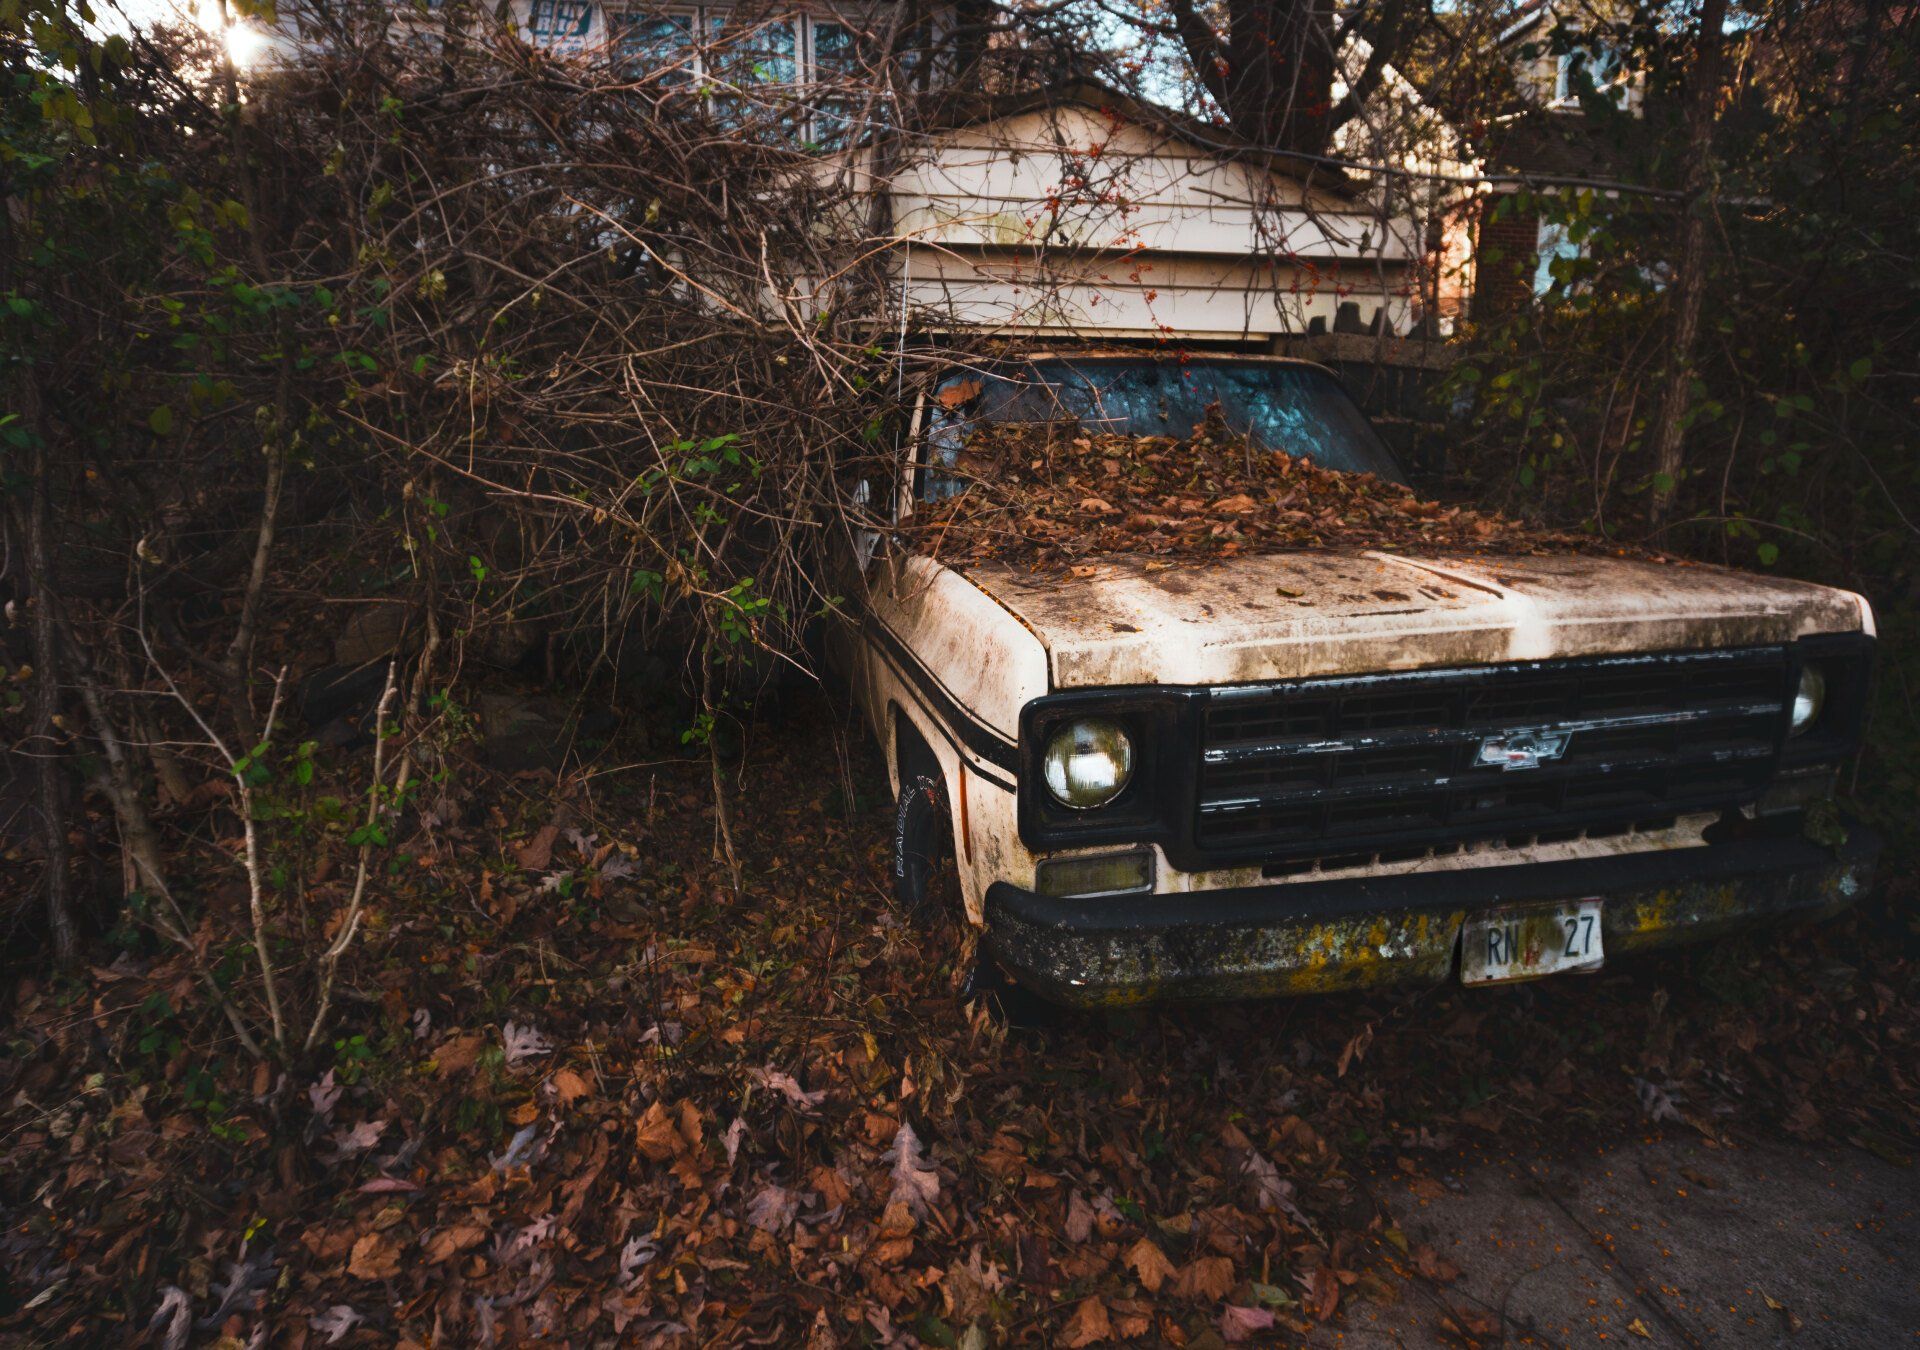 An old truck is covered in leaves in front of a house.